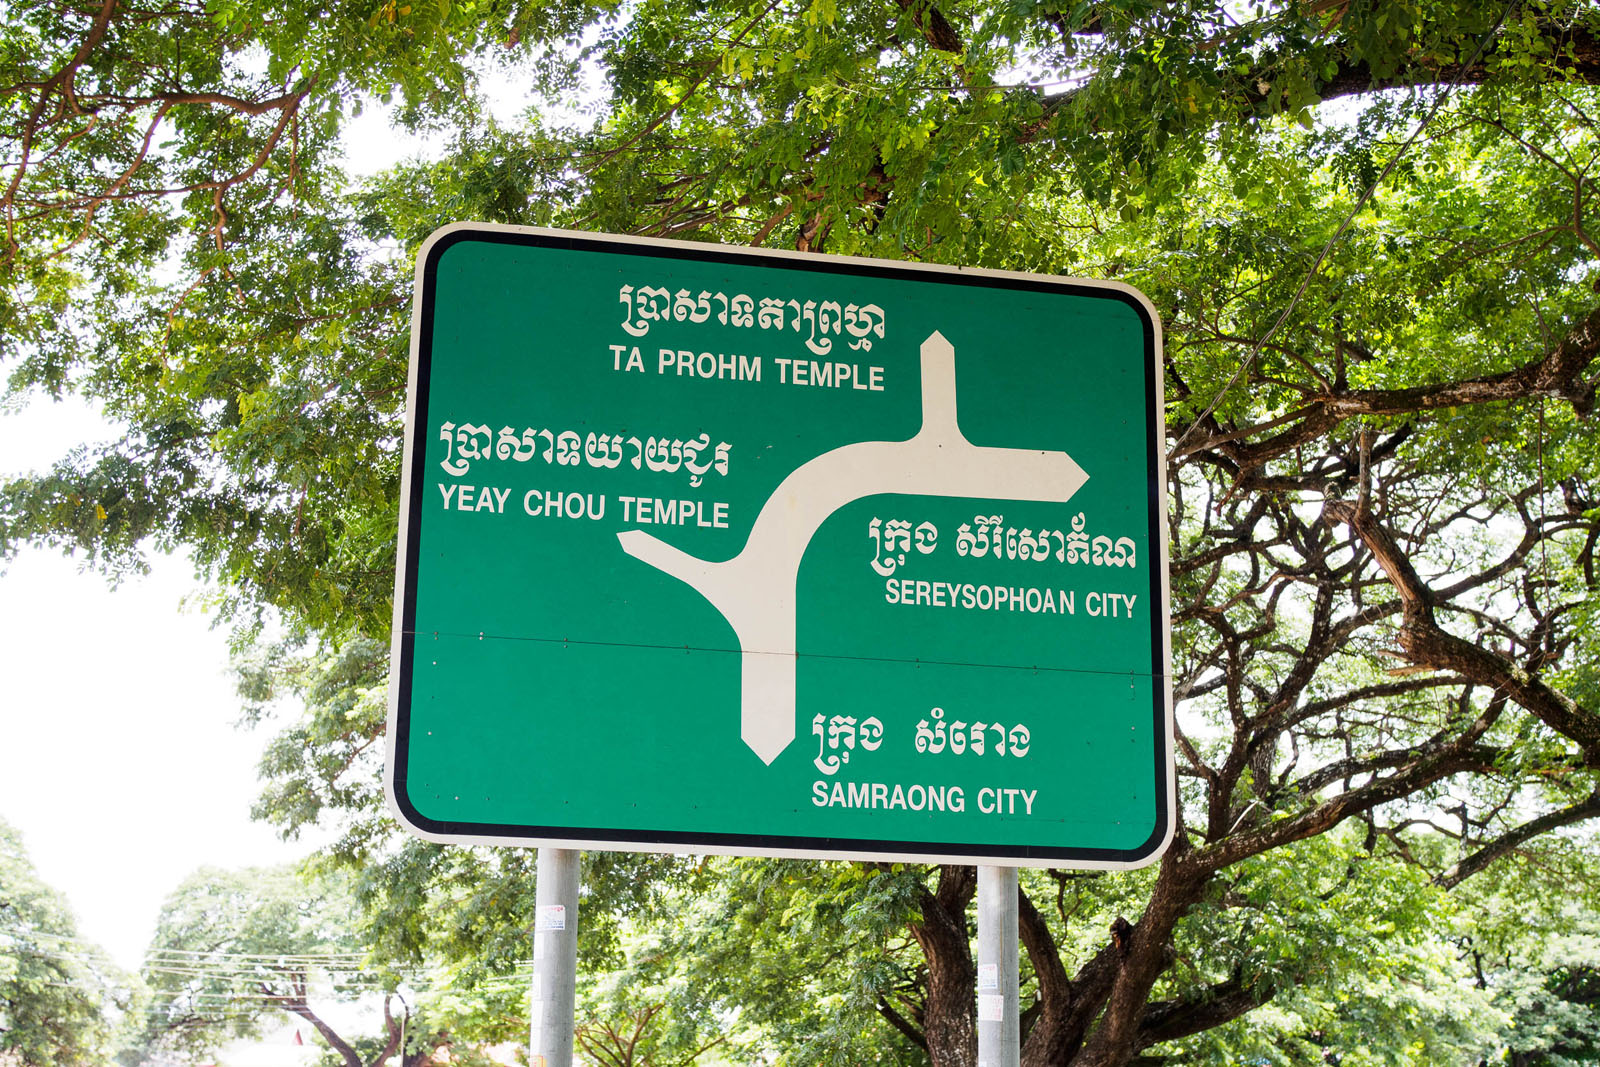 A road sign points the way to Ta Prohm and Yeay Chou, two of the nine satellite temples that make up the Banteay Chhmar complex. Photo by Emily Lush